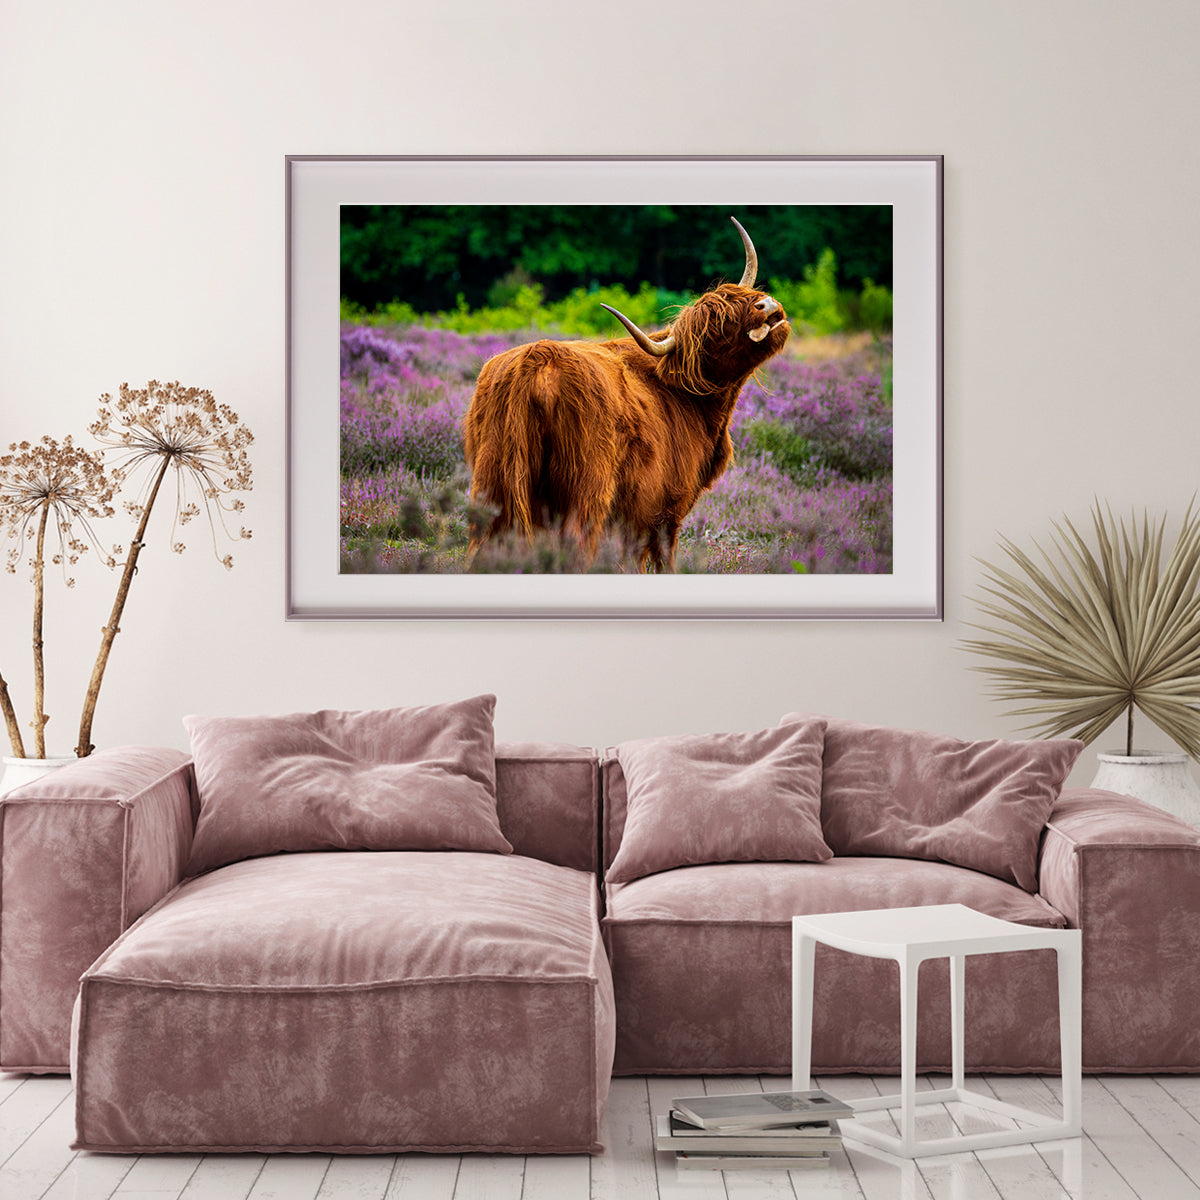 Scottish Highlander Cow in Meadow Posters Prints Wall Decor-Horizontal Posters NOT FRAMED-CetArt-10″x8″ inches-CetArt